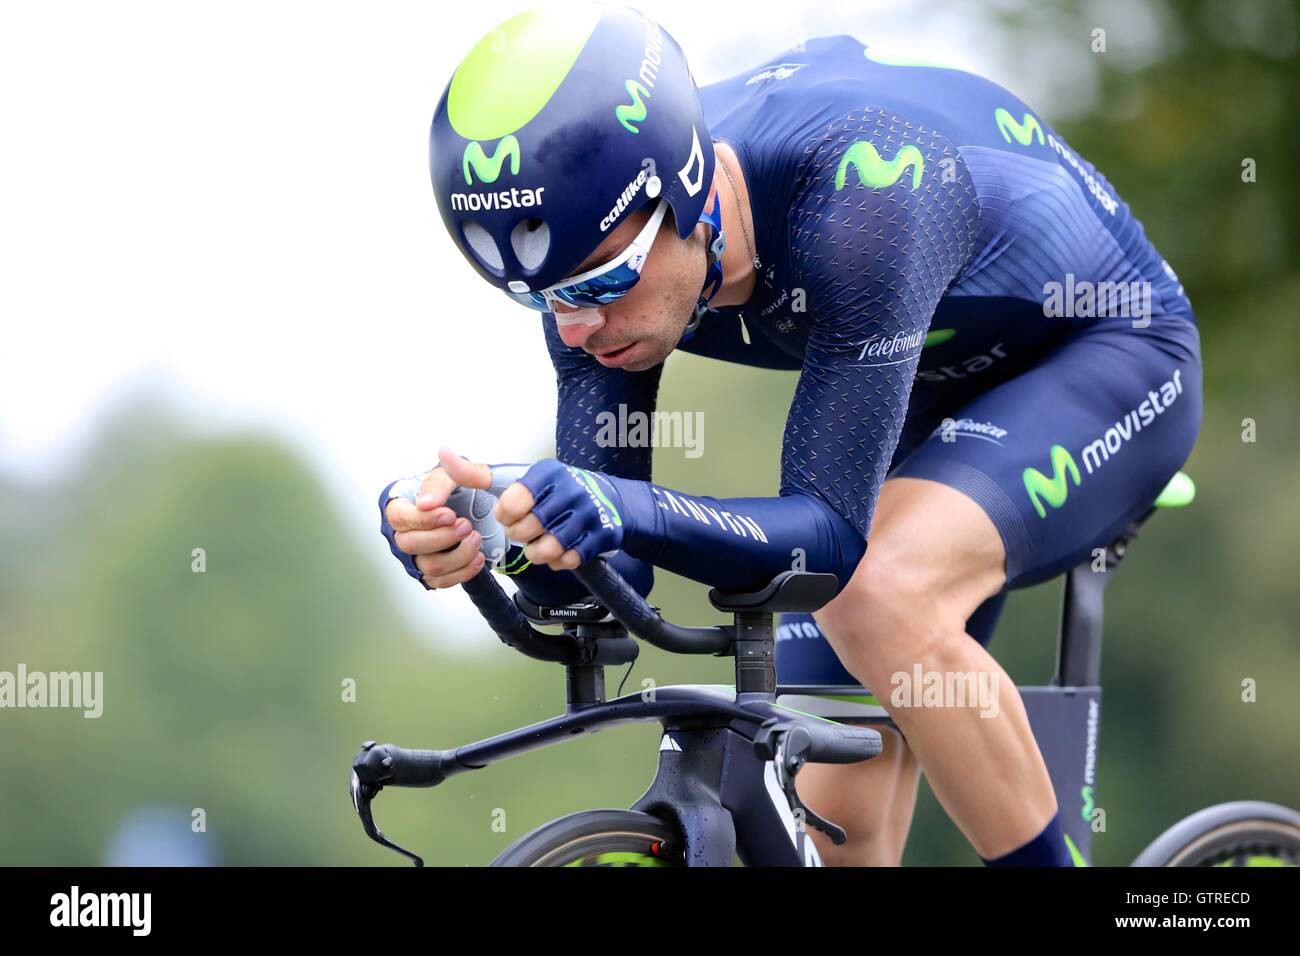 Bristol, UK.  10th September 2016. Tour of Britain stage 7a, time trial.  Giovanni Visconti of Team Movistar Credit:  Neville Styles/Alamy Live News Stock Photo